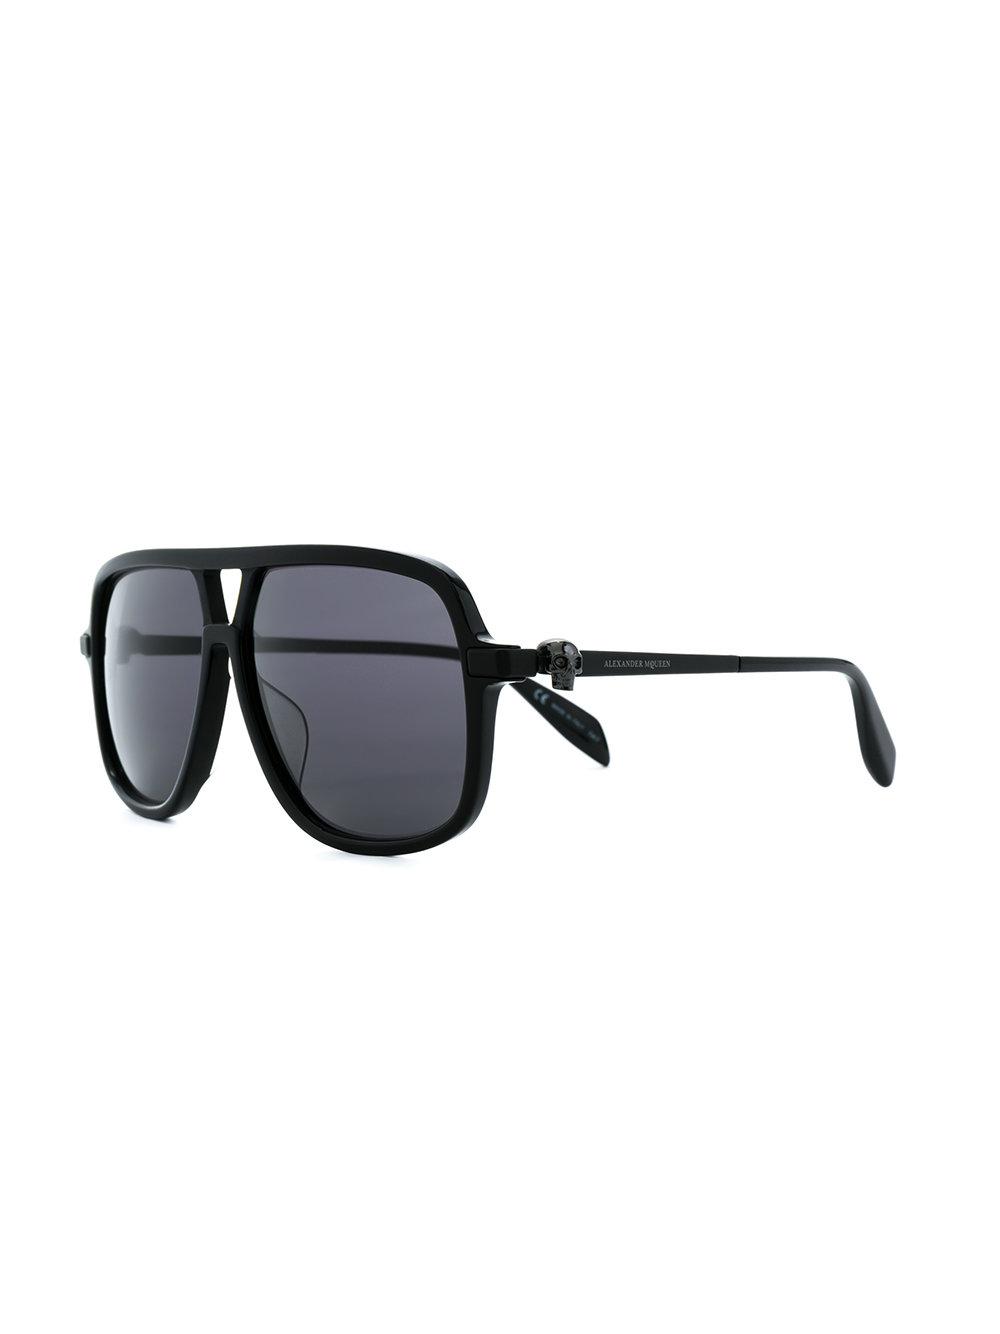 Alexander McQueen Thick Frame Sunglasses in Black - Lyst